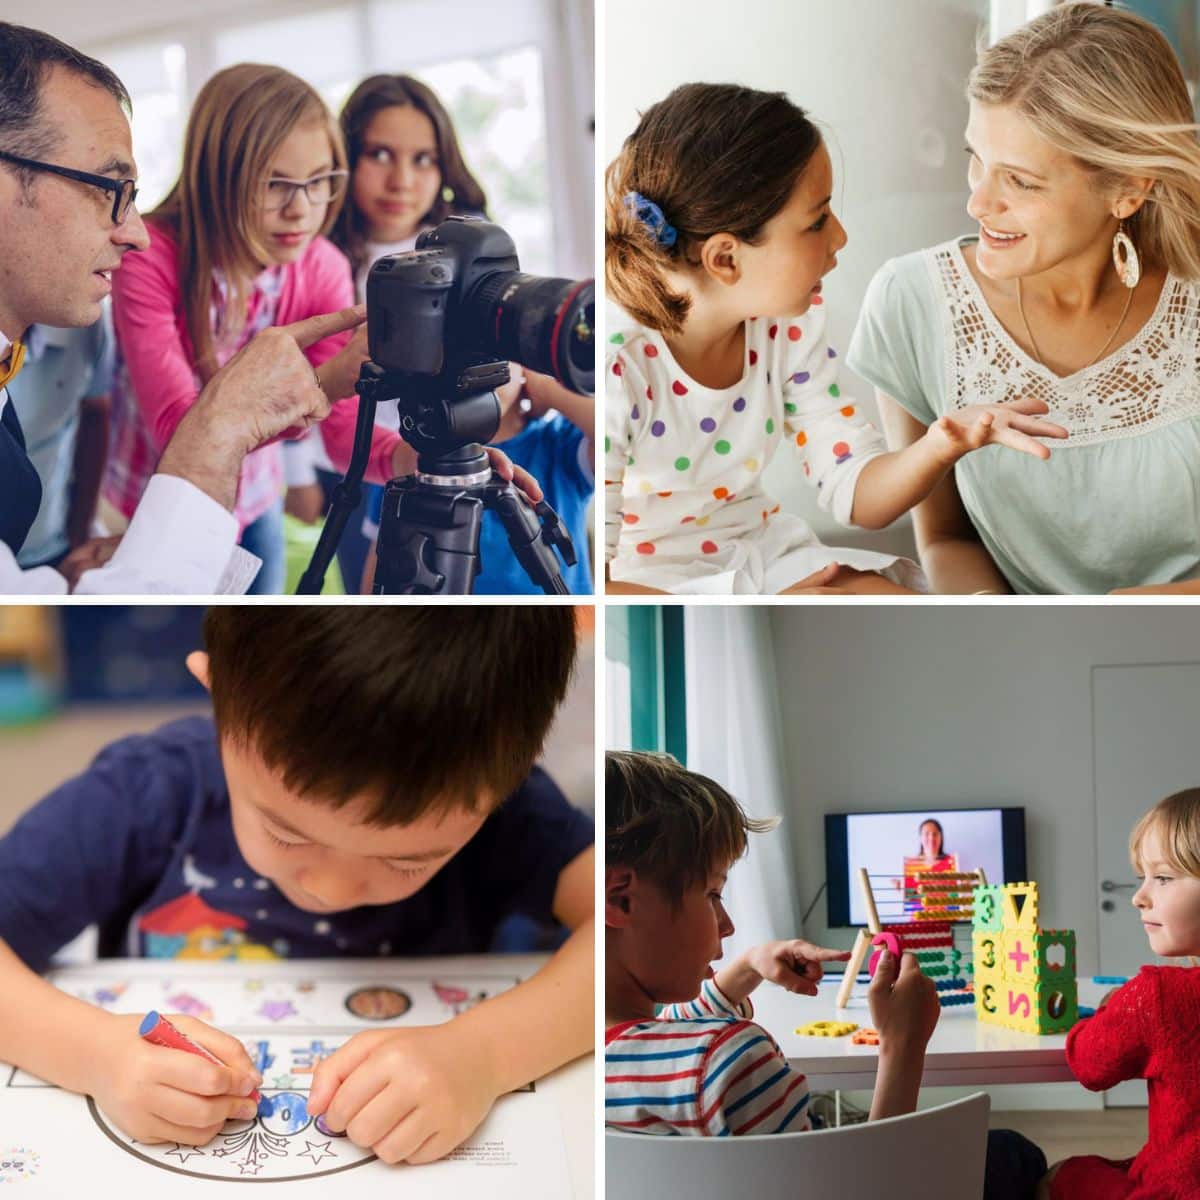 4 images of clever  homeschooling ideas.